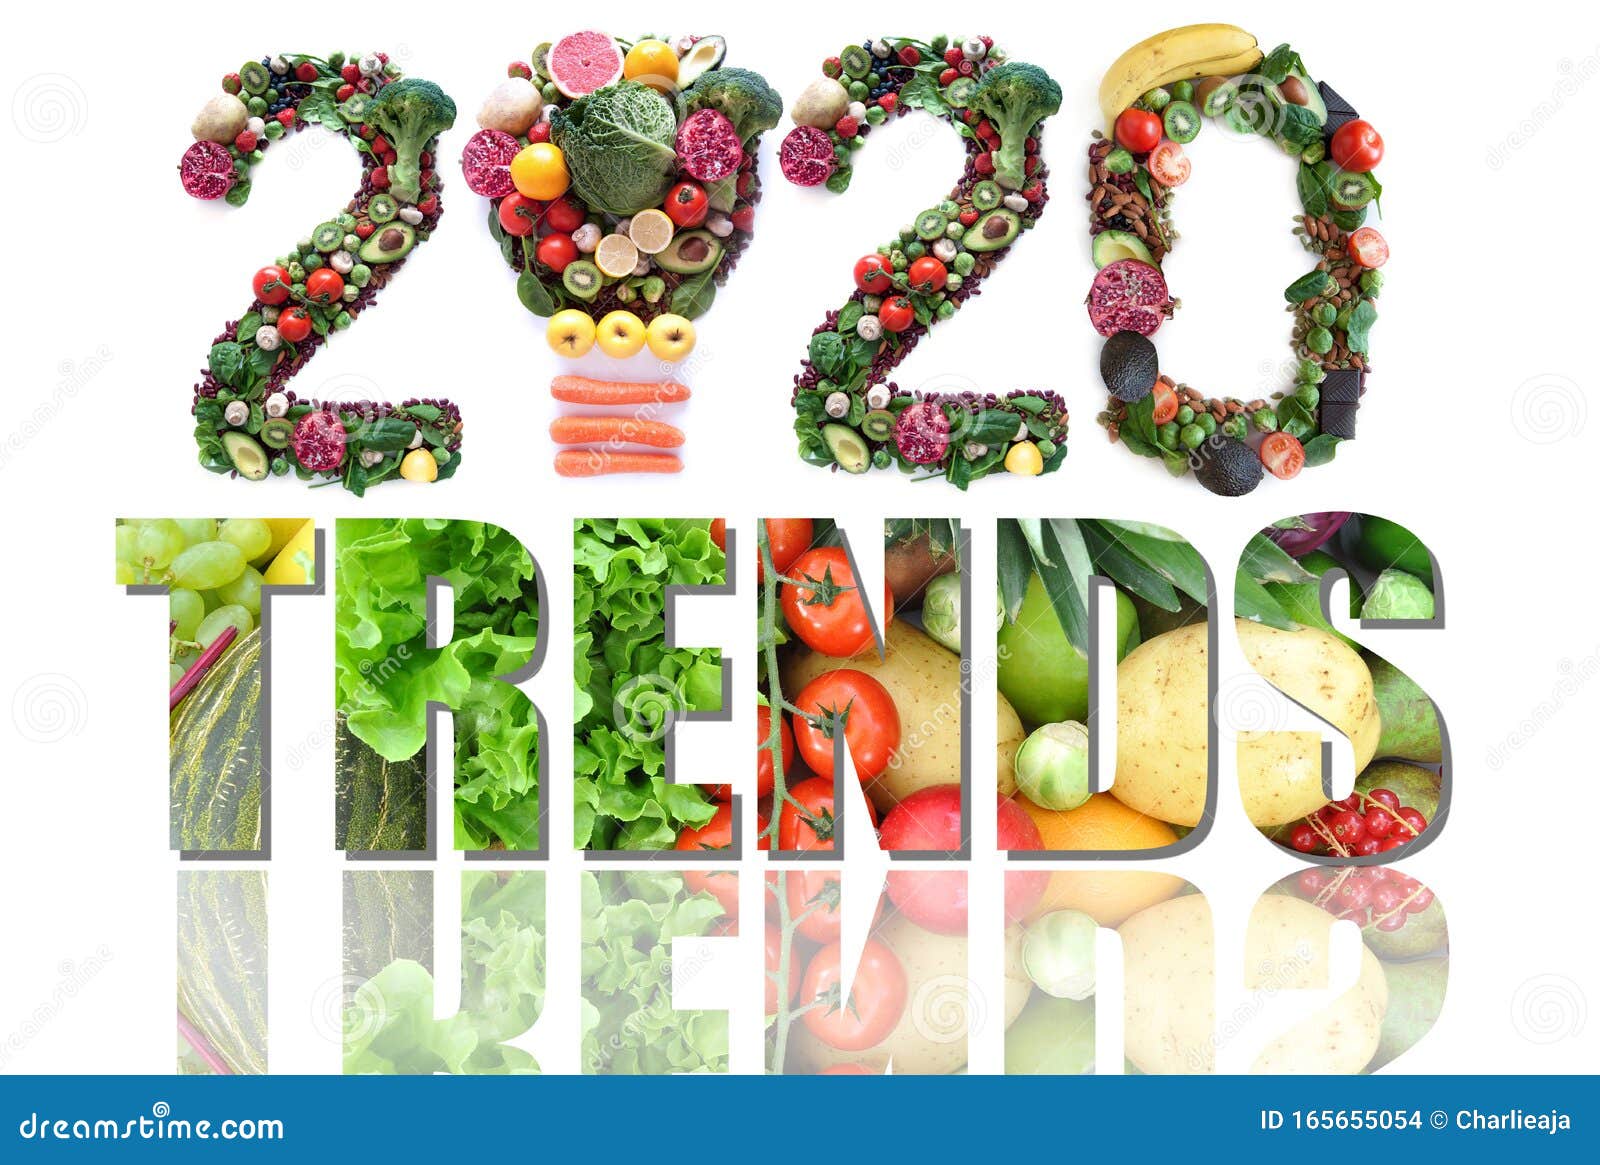 2020 food and health trends